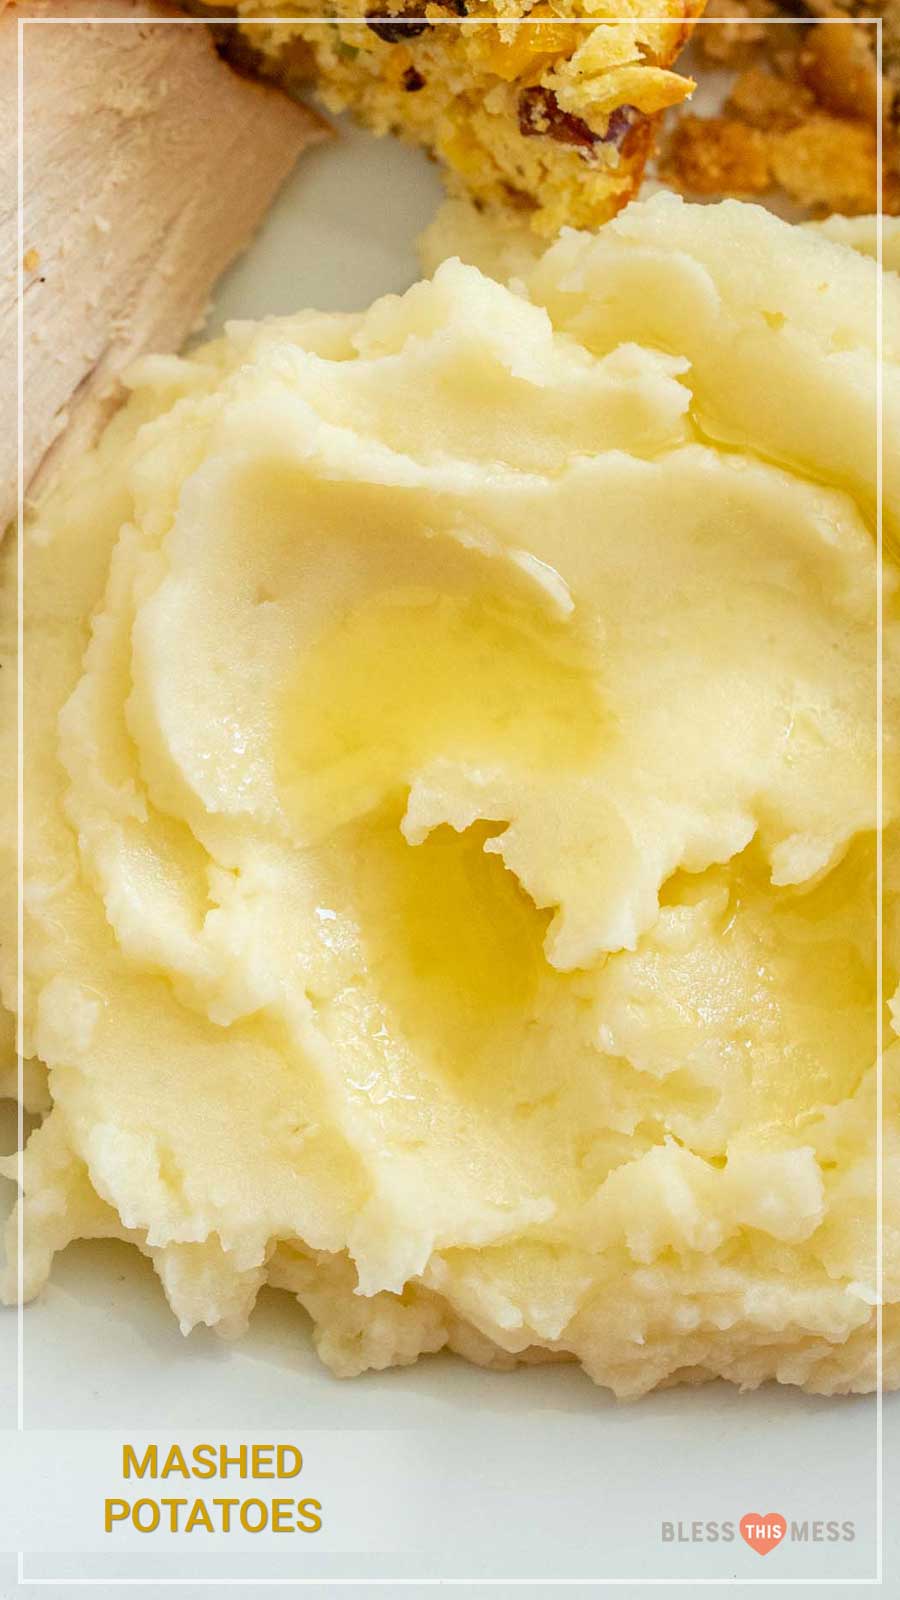 No holiday table is complete without a batch of classic, buttery mashed potatoes, and this recipe is perfectly easy to make and yields a heavenly and fluffy bowl of mashed potatoes. Using russet potatoes and butter with a few other simple ingredients, you can have the best homemade mashed potatoes for your holiday table or any other occasion. #mashedpotatoes #homemademashedpotatoes #mashedpotatorecipe #russetpotatoes #potatoes #potatorecipe #thanksgiving #thanksgivingdishes #thanksgivingrecipe